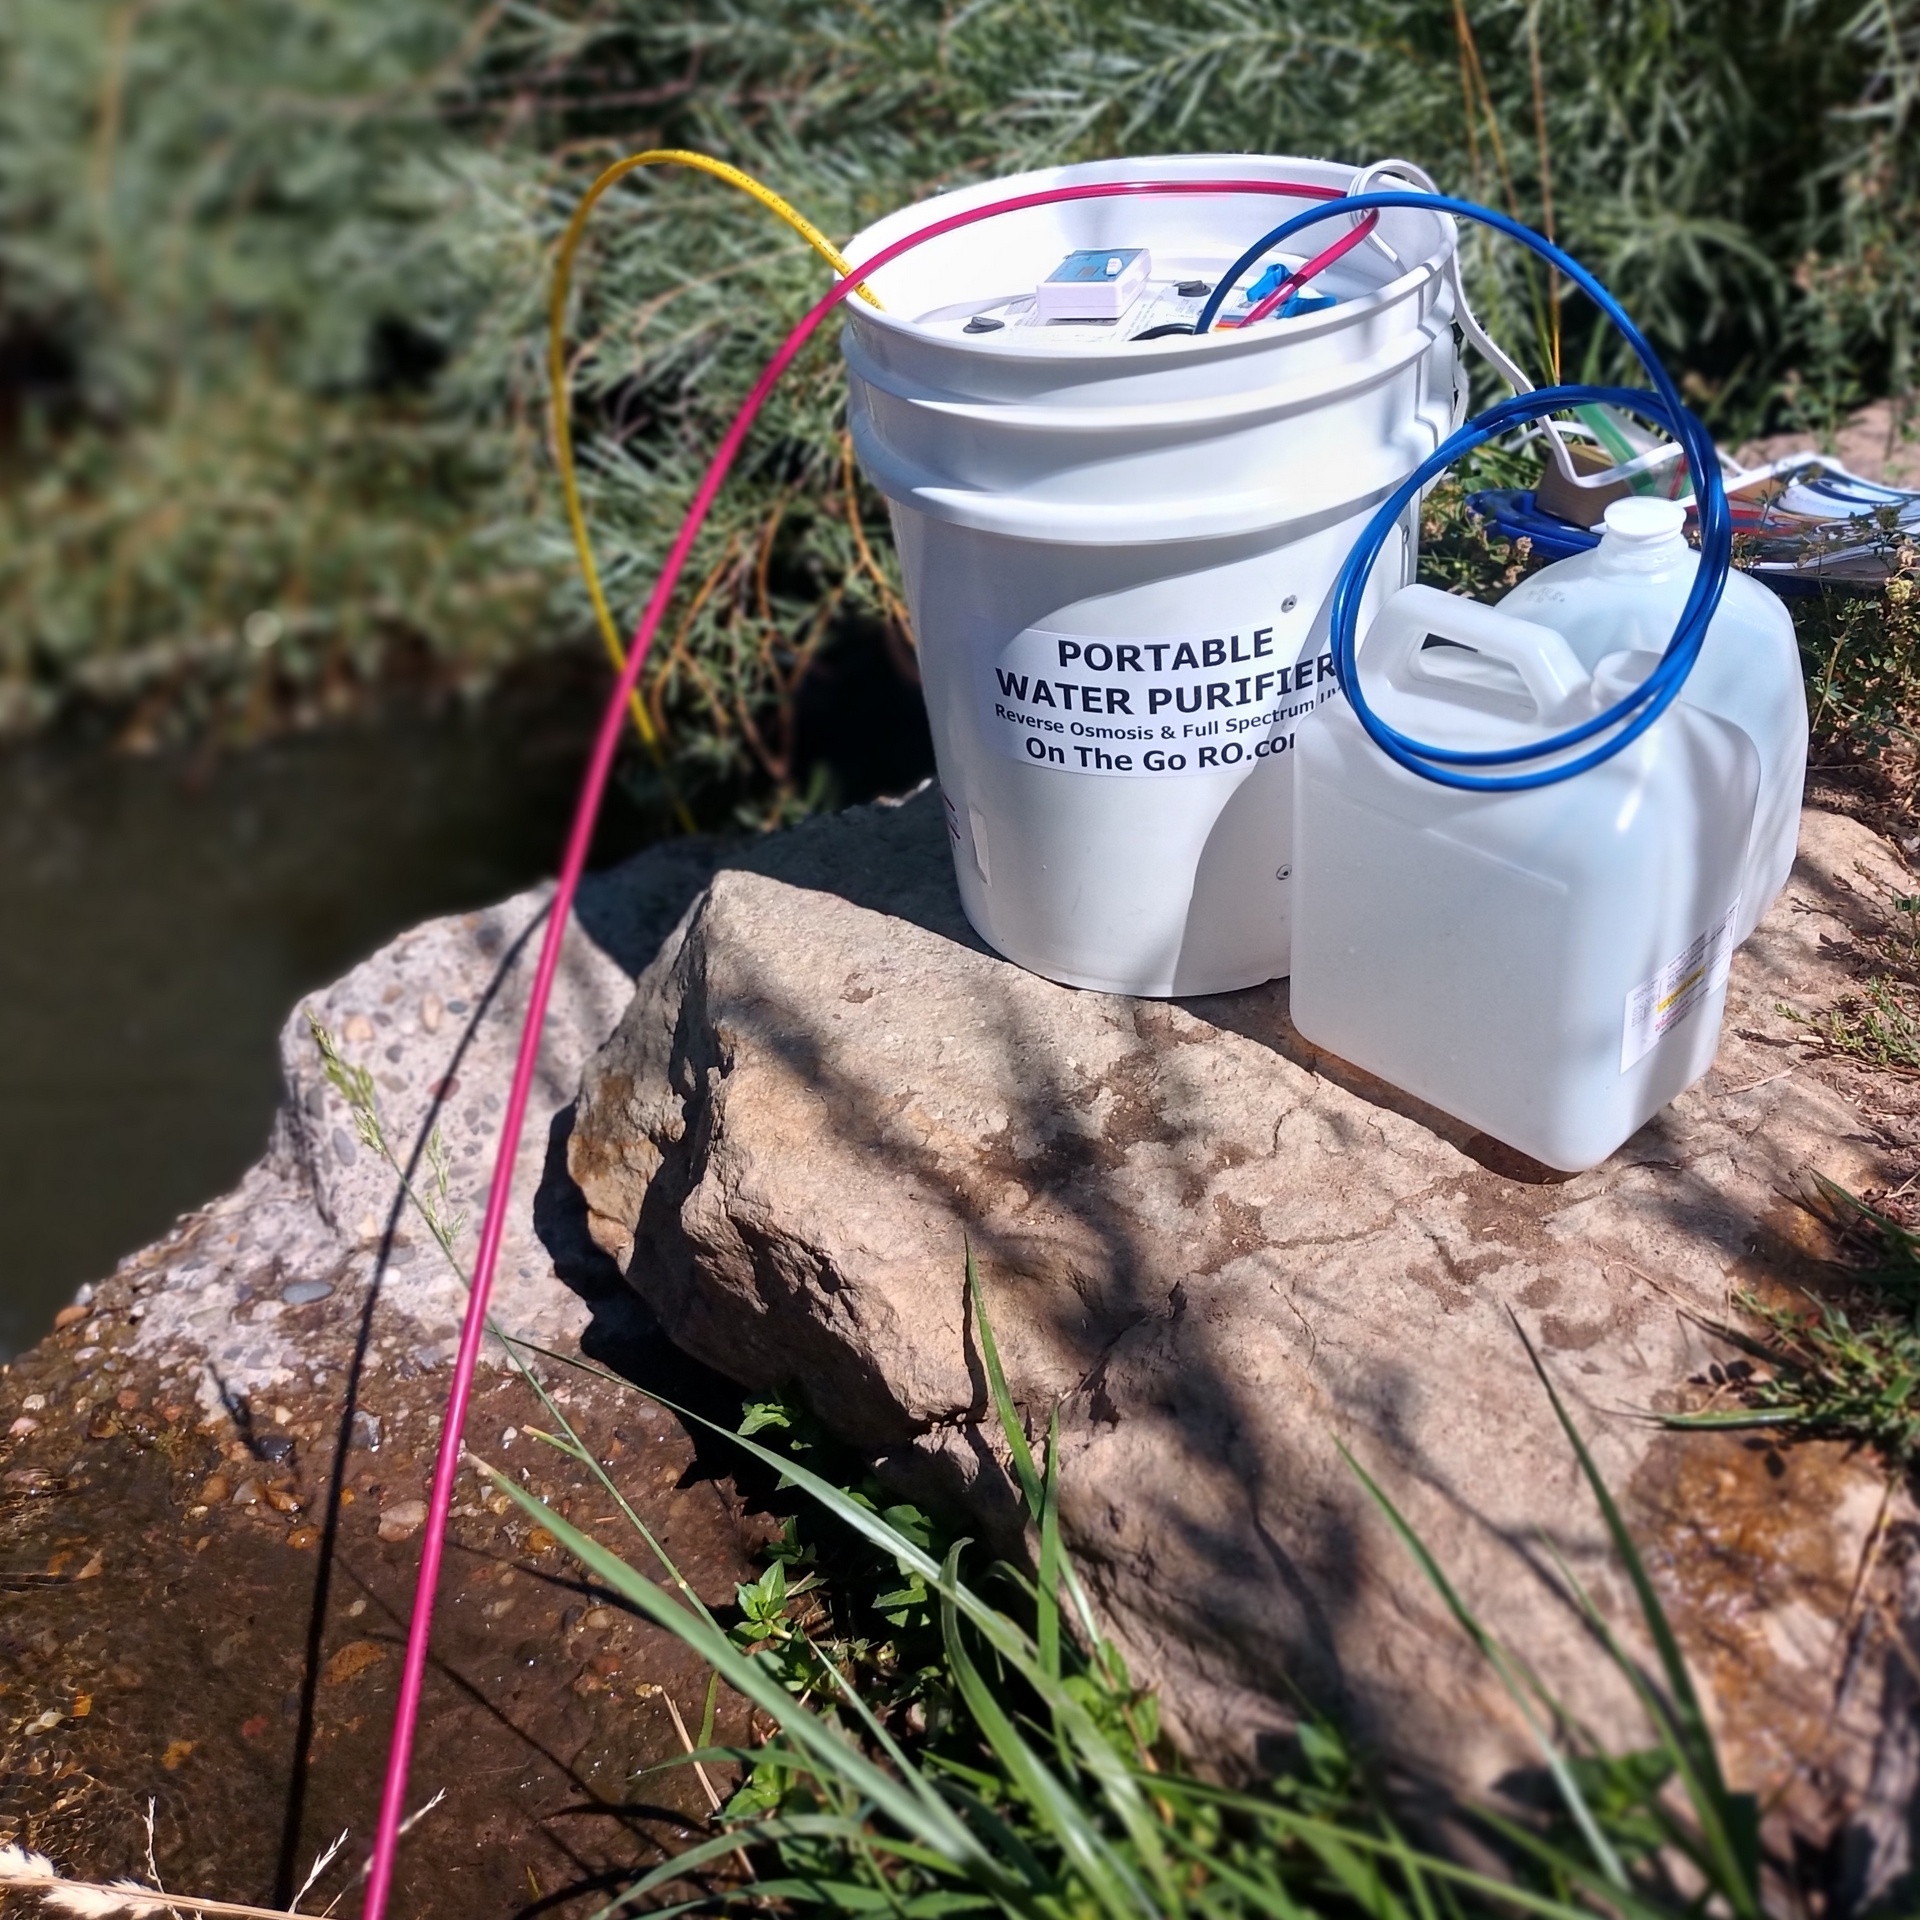 Photo purifying water from stream